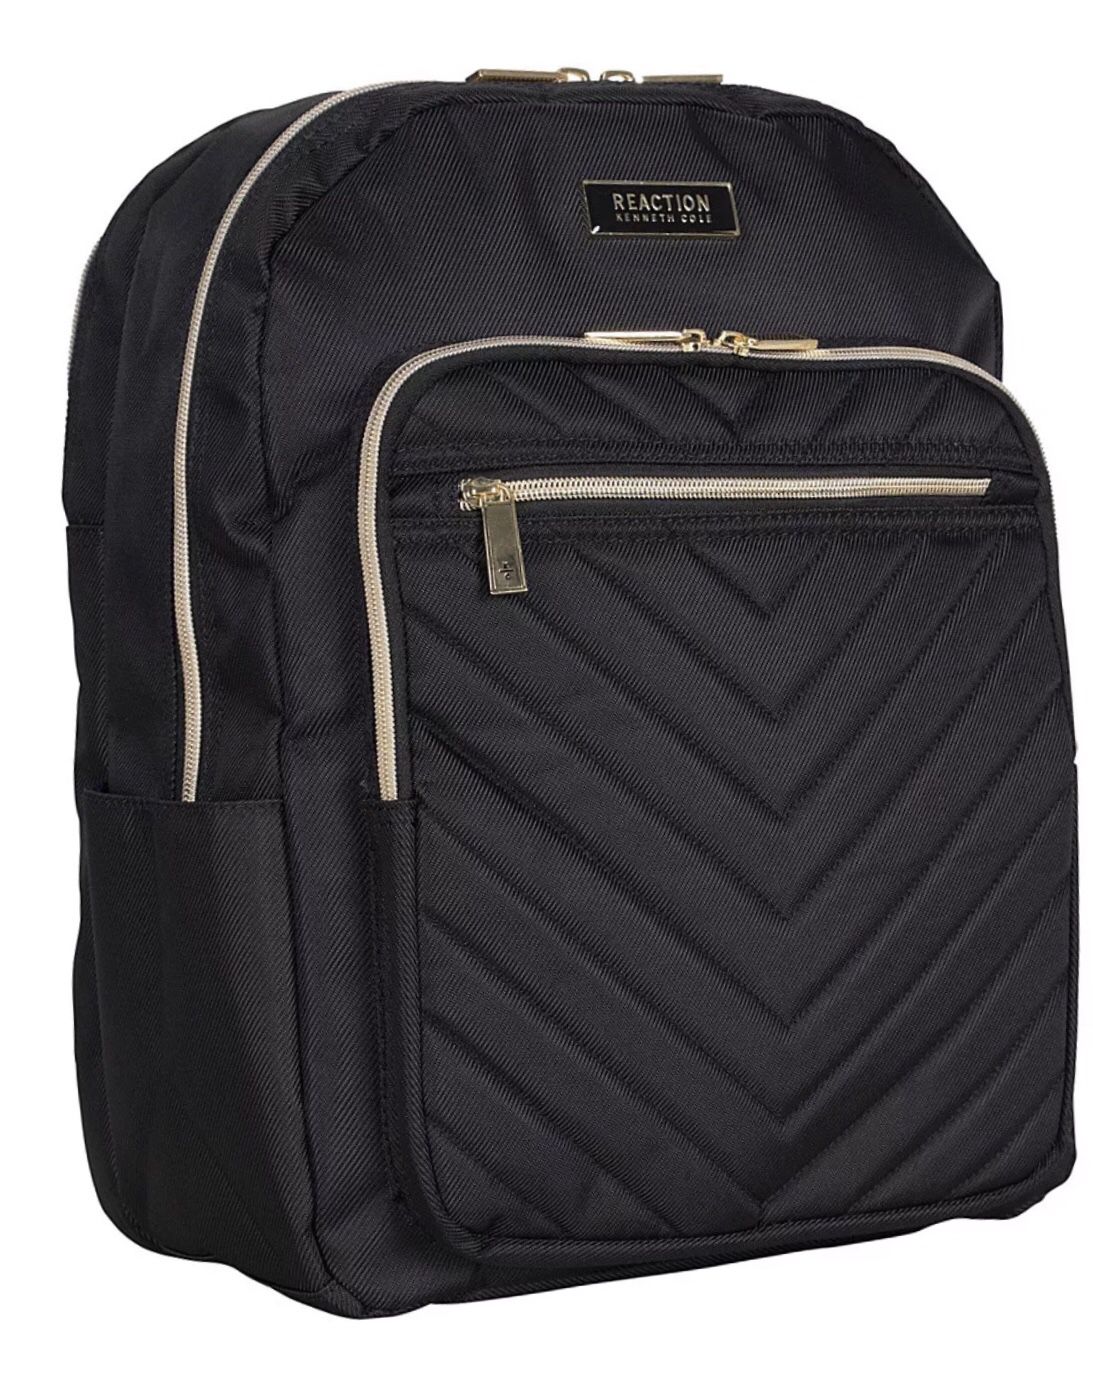 Kenneth Cole brand new laptop backpack